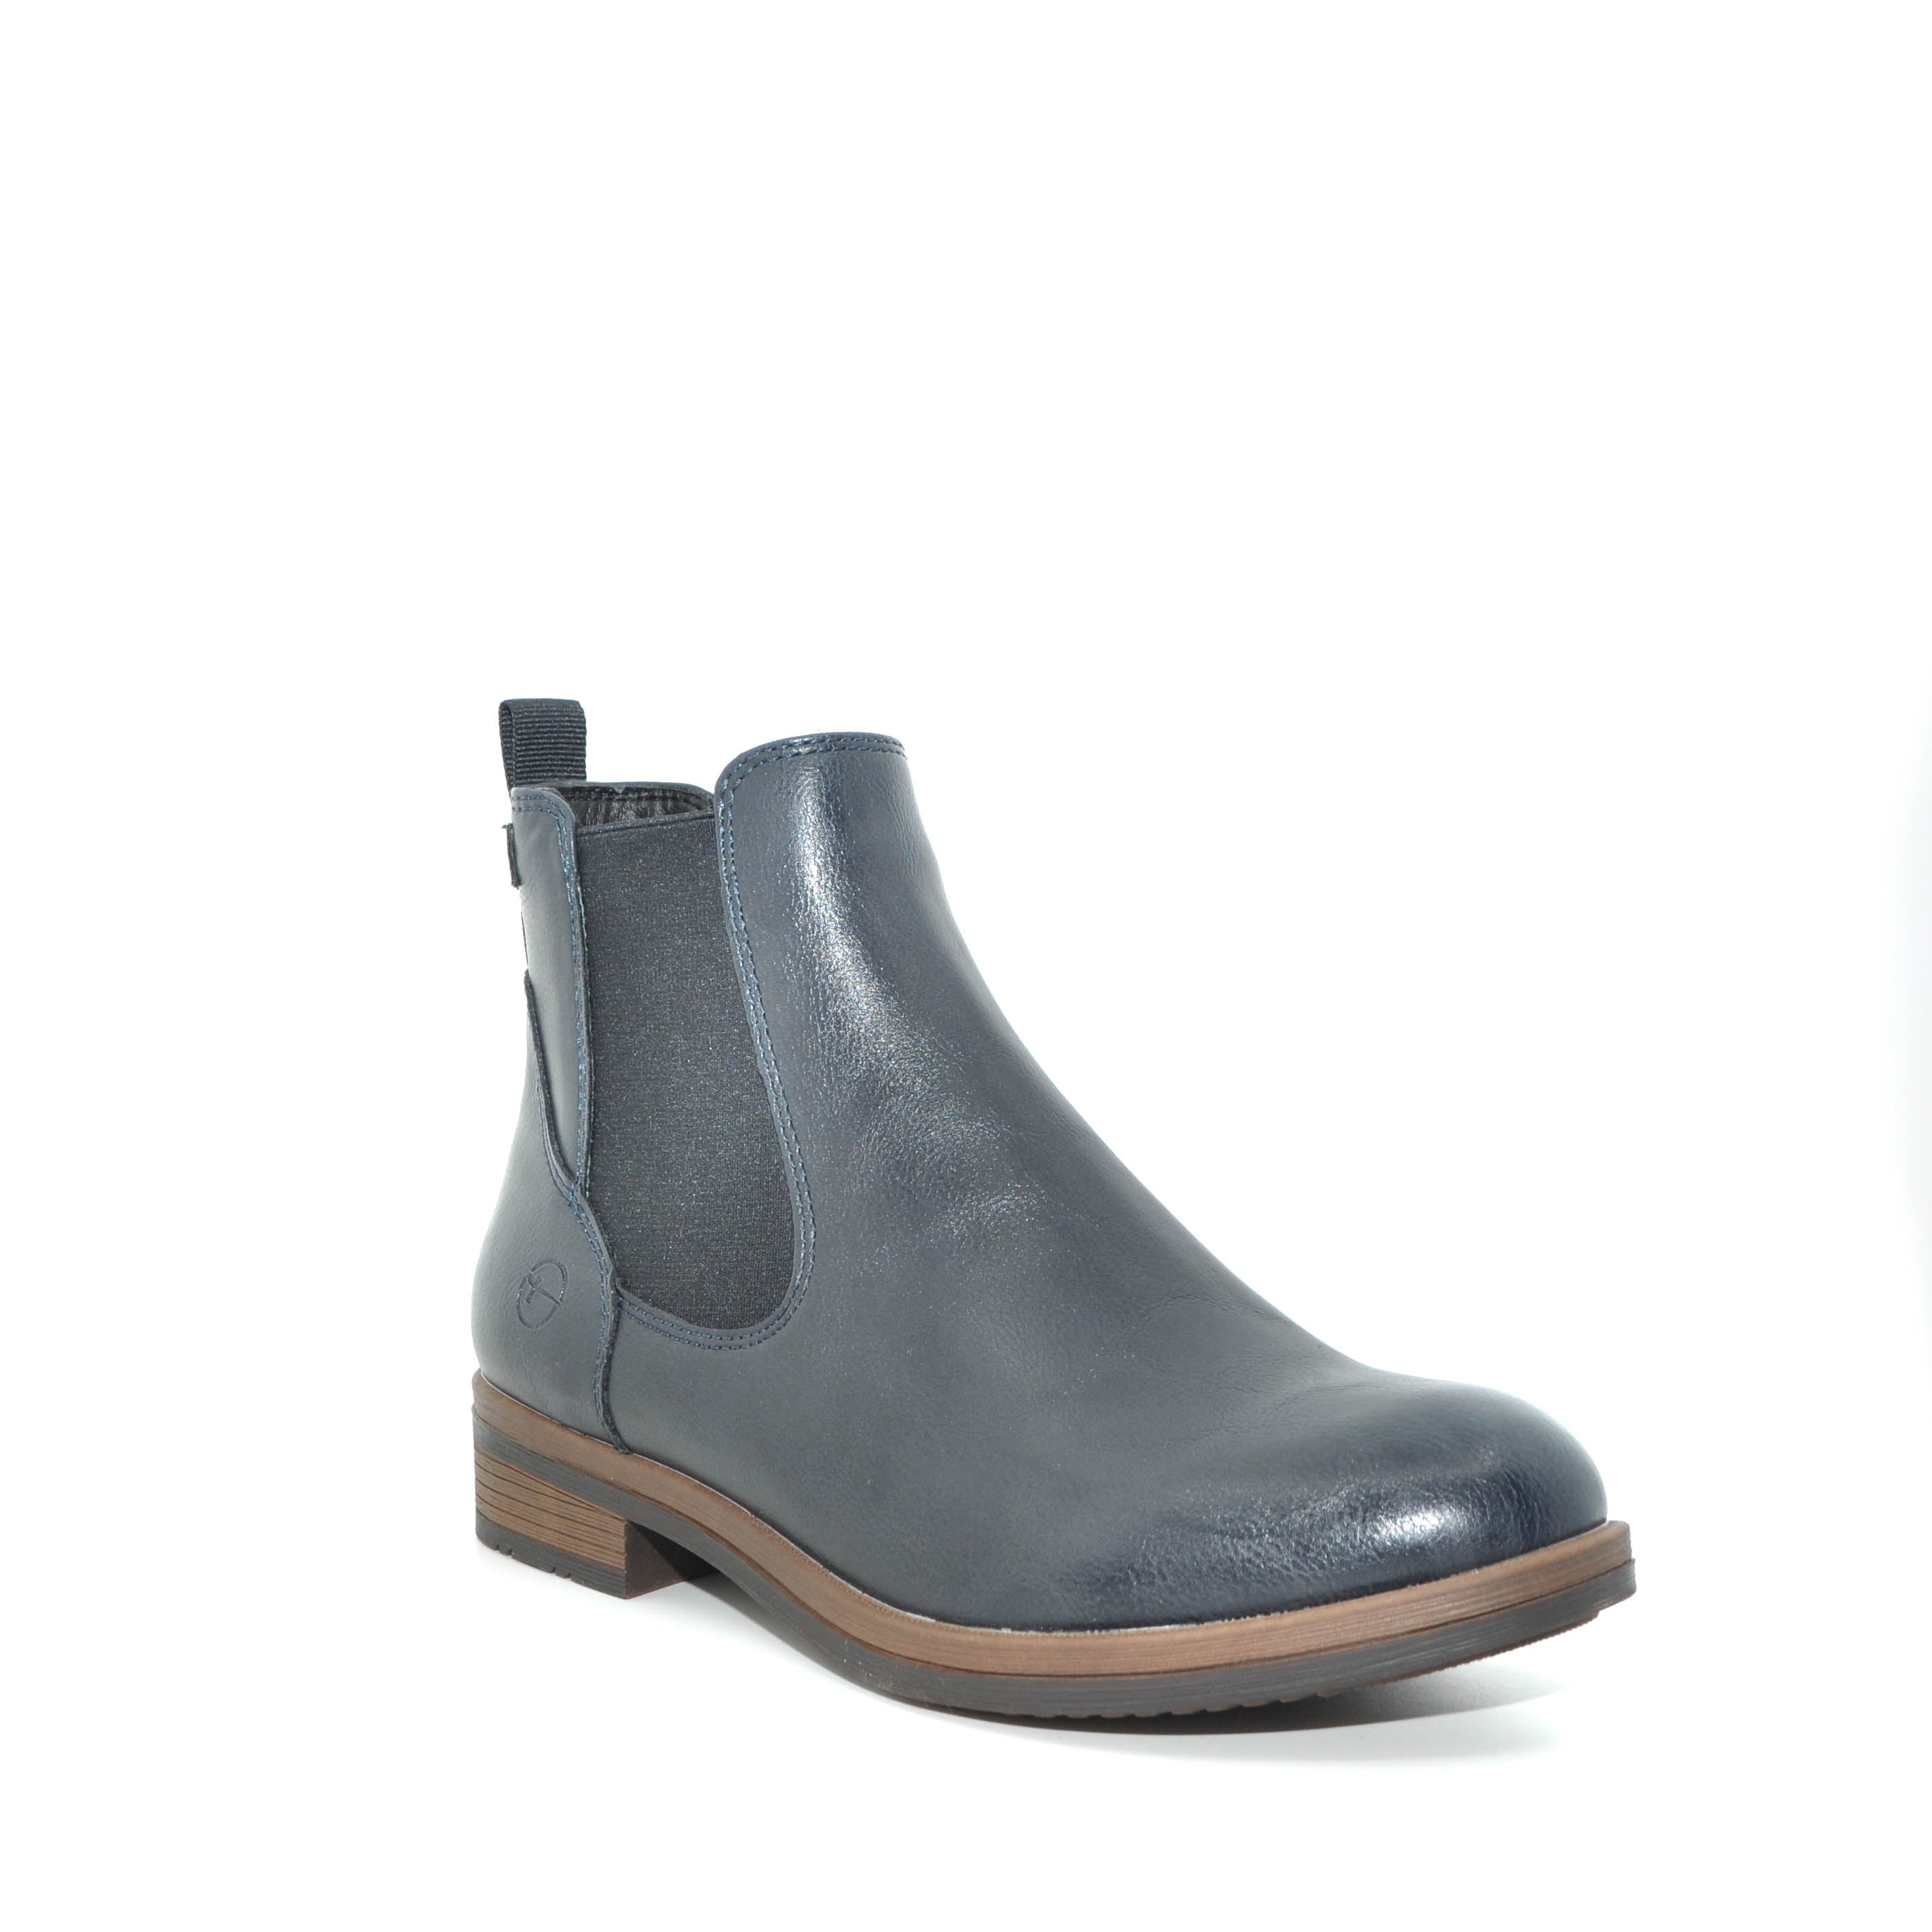 navy chelsea boots for women